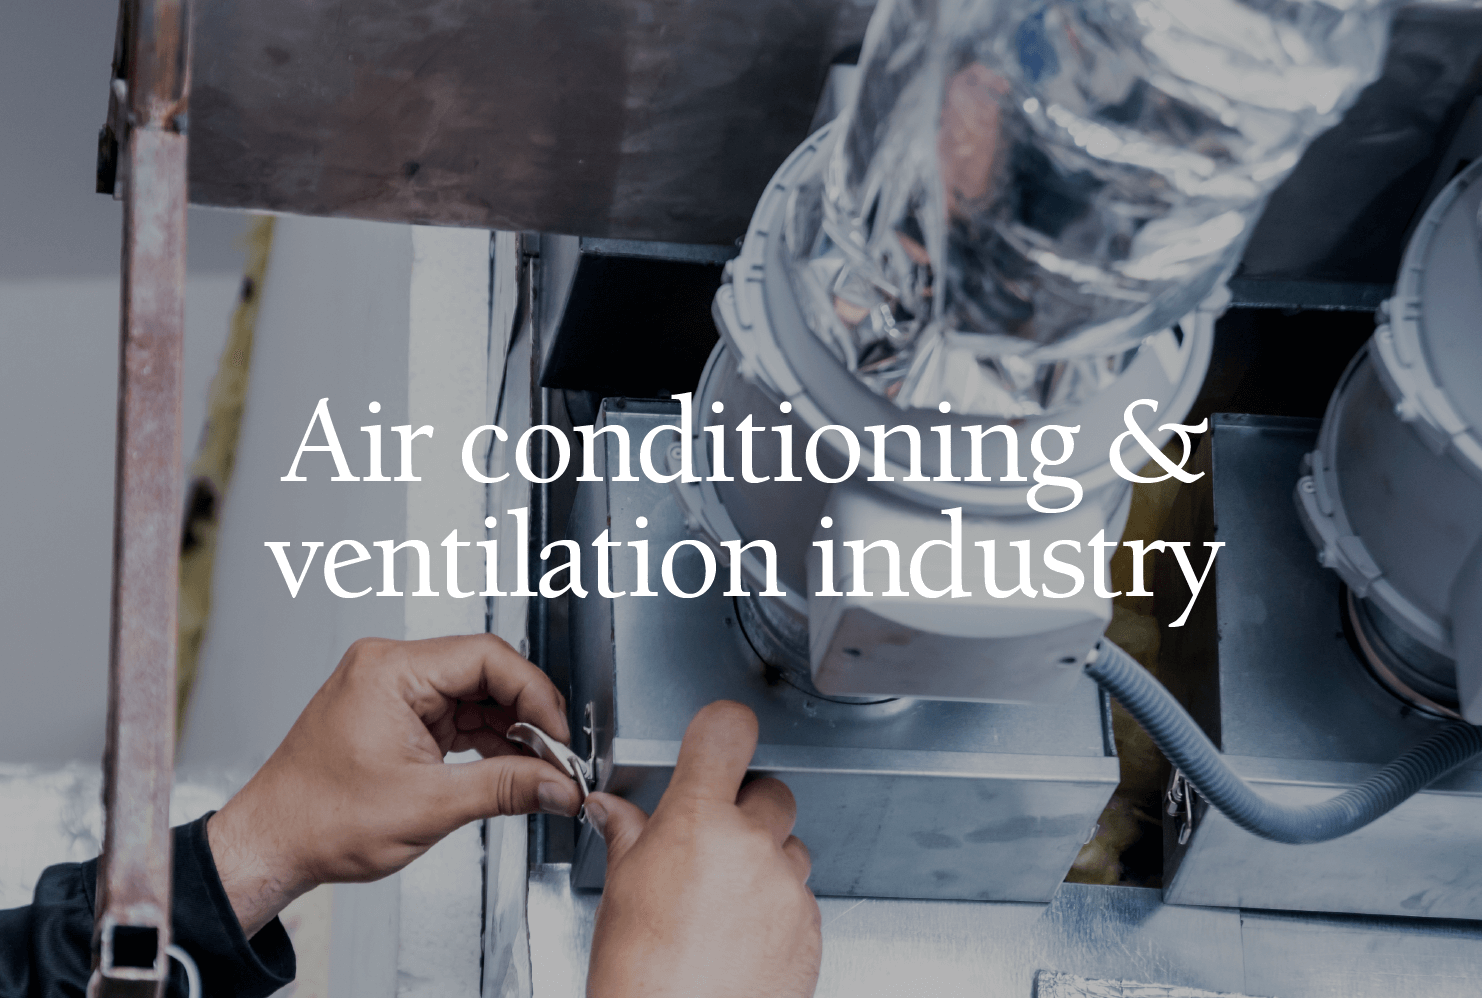 Air conditioning & ventilation industry